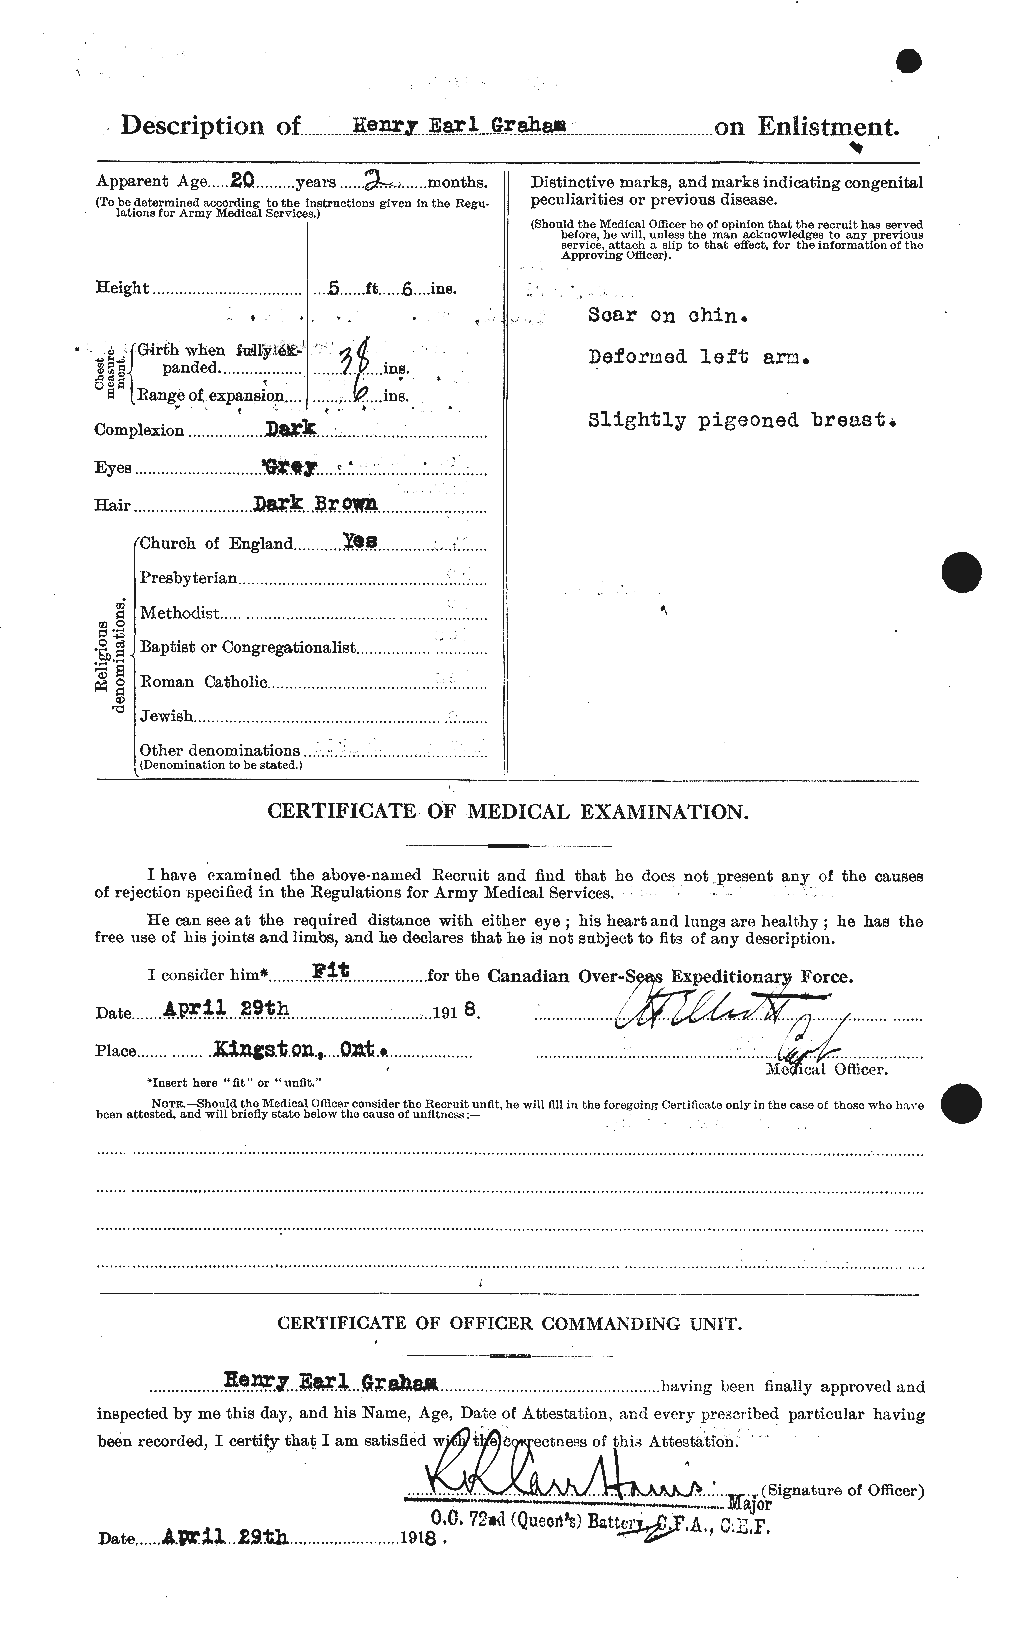 Personnel Records of the First World War - CEF 357735b